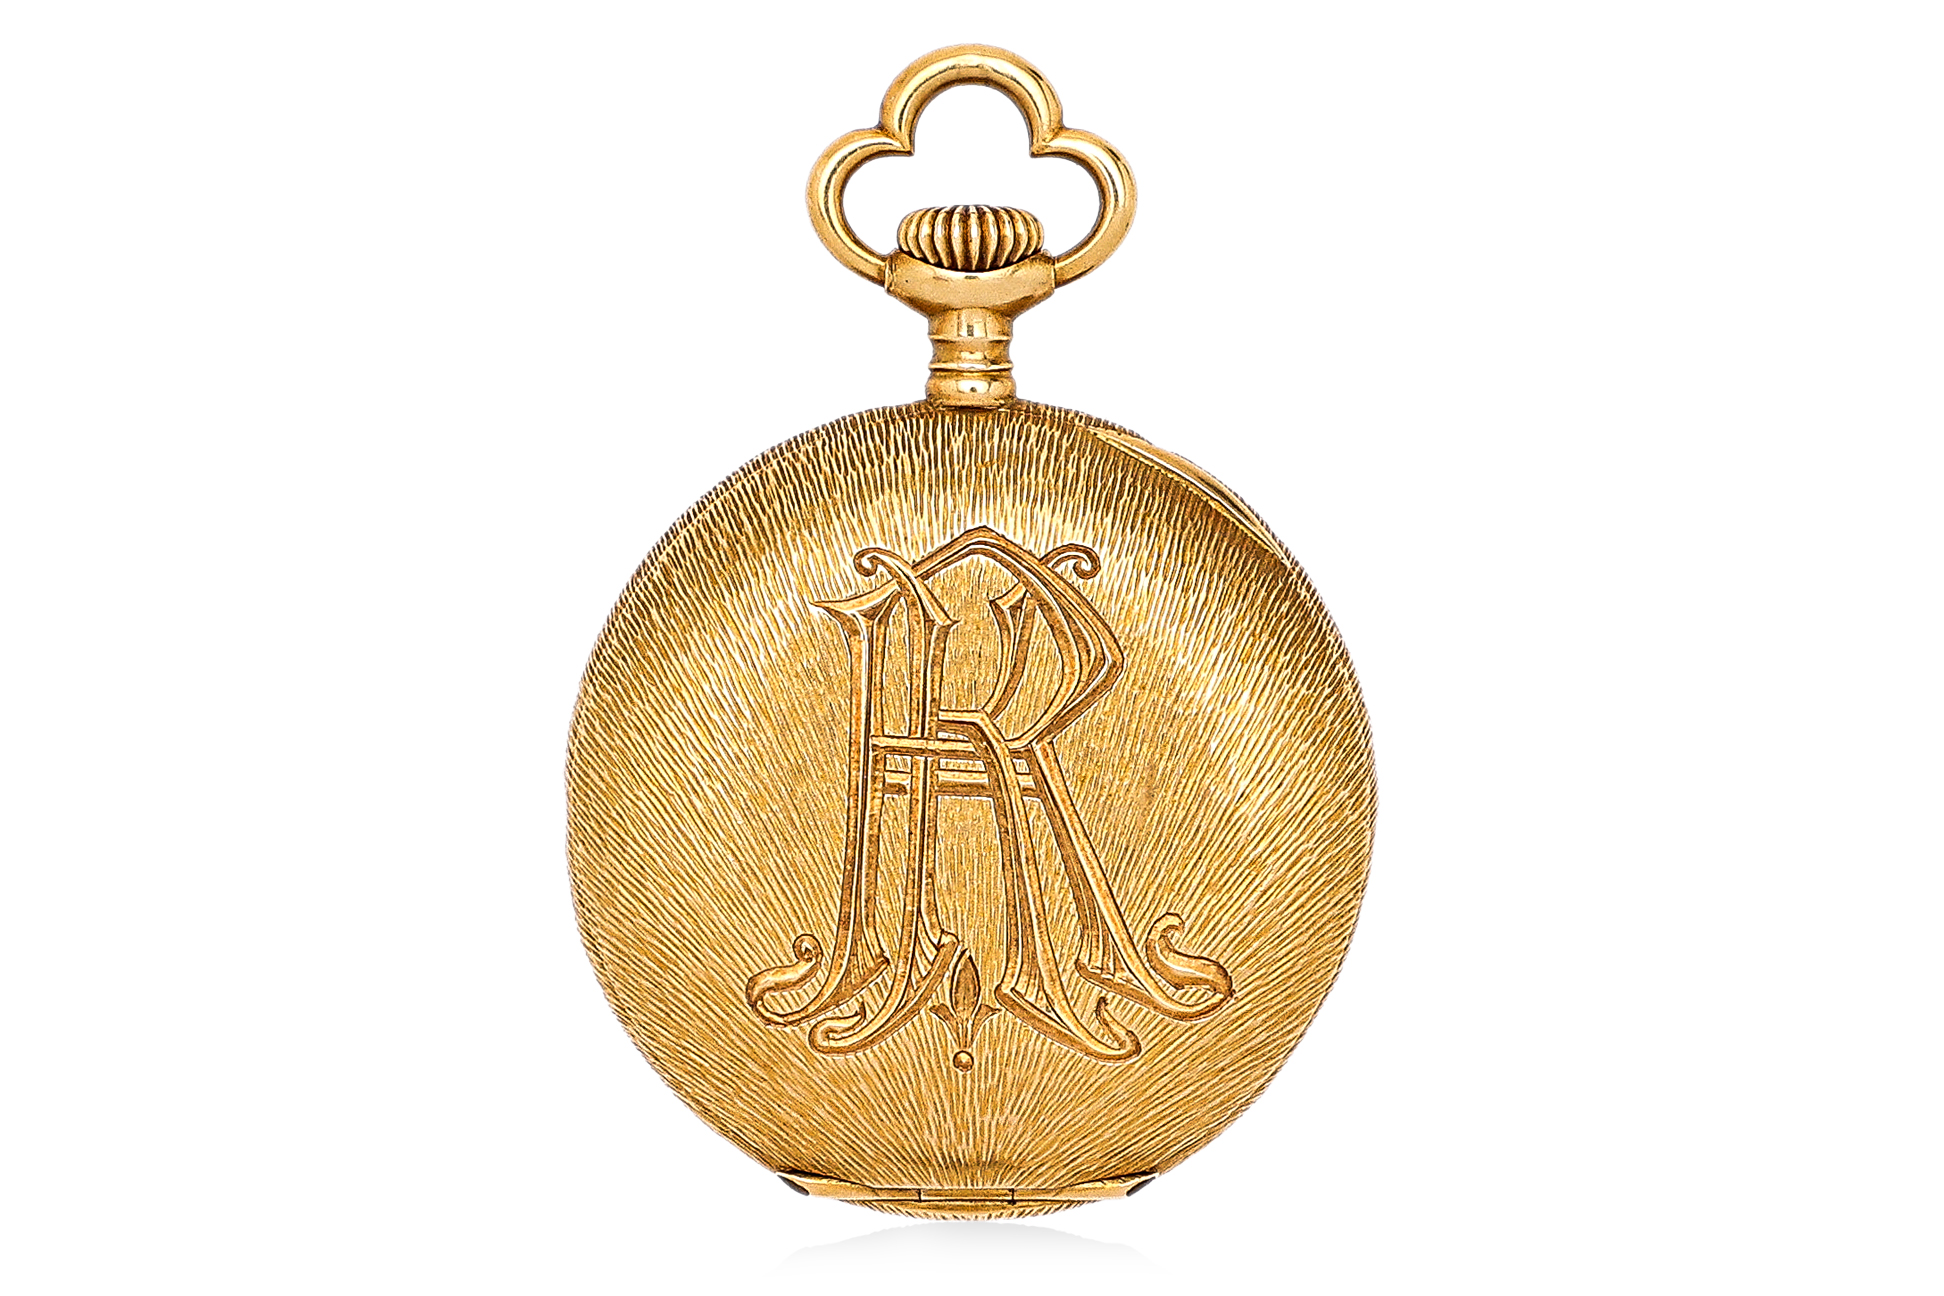 A SWISS LADIES 18K GOLD POCKET WATCH - Image 2 of 3